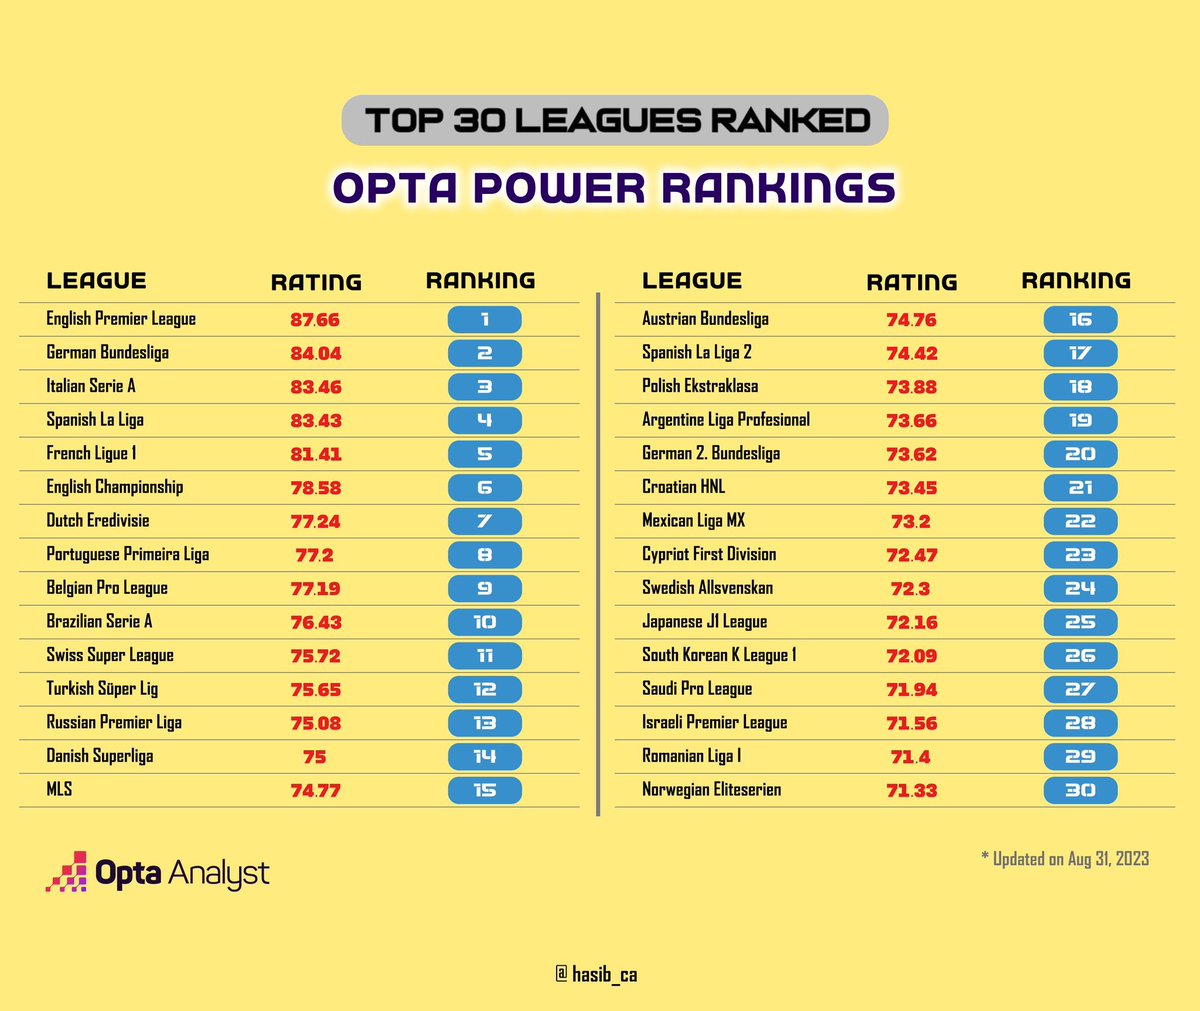 MLS ranked 29th strongest league in the world, per Opta